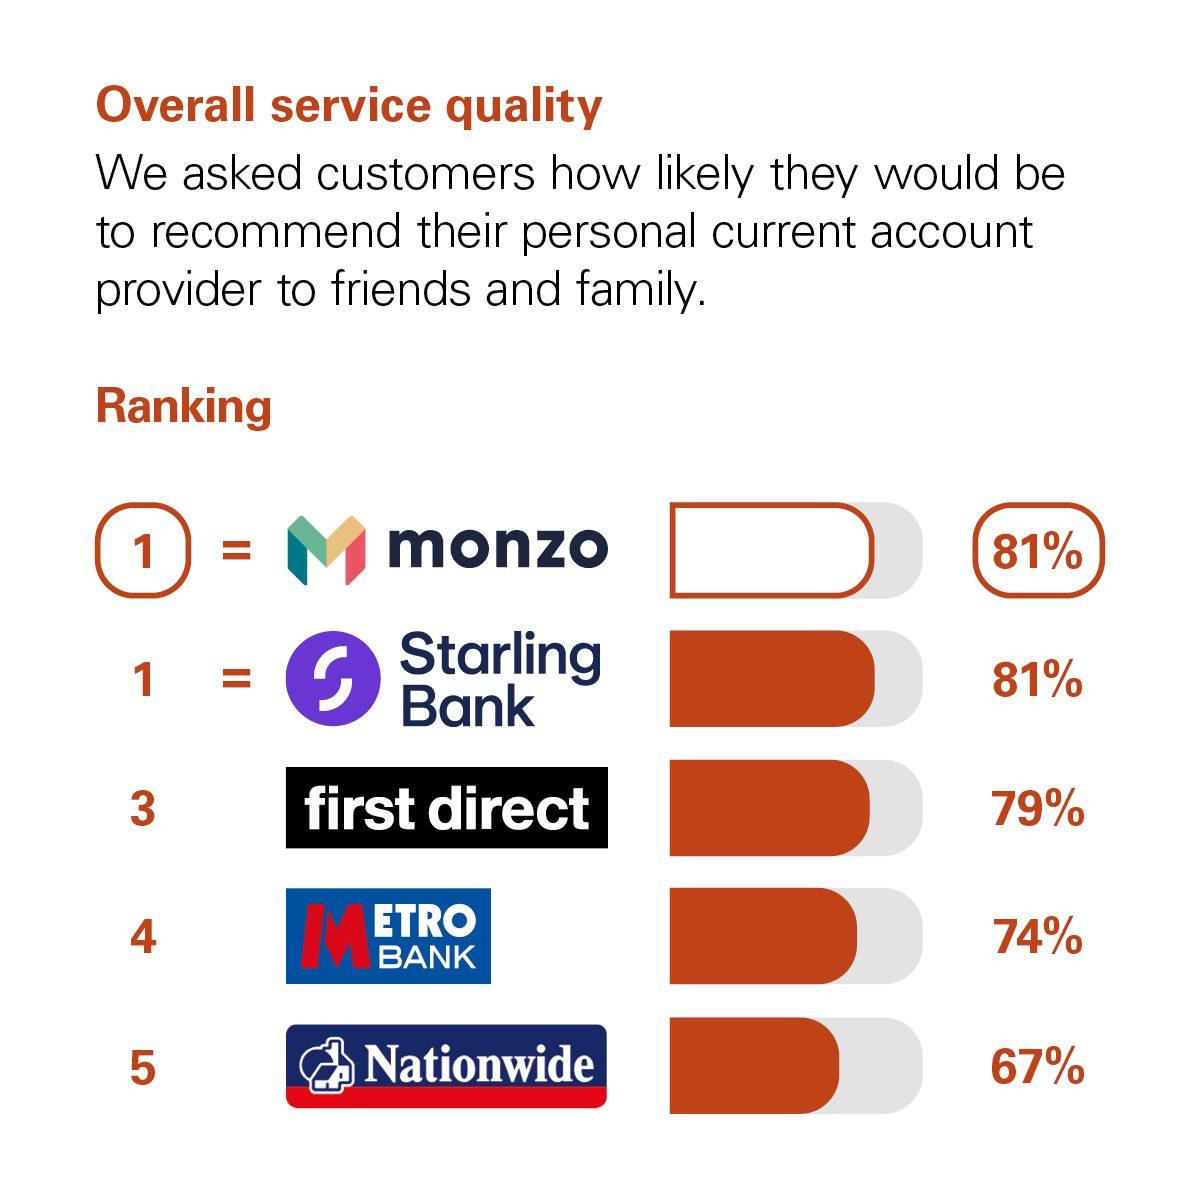 Graph showing the results of the CMA scoring of UK banks in the Overall Service Quality category. The CMA asked customers how likely they would be to recommend their personal current account provider to friends and family. The rankings with percentage scores are: Joint 1st are Monzo and Starling Bank with 81%. 3rd First Direct with 79%. 4th Metro Bank with 74%. 5th Nationwide with 67%.